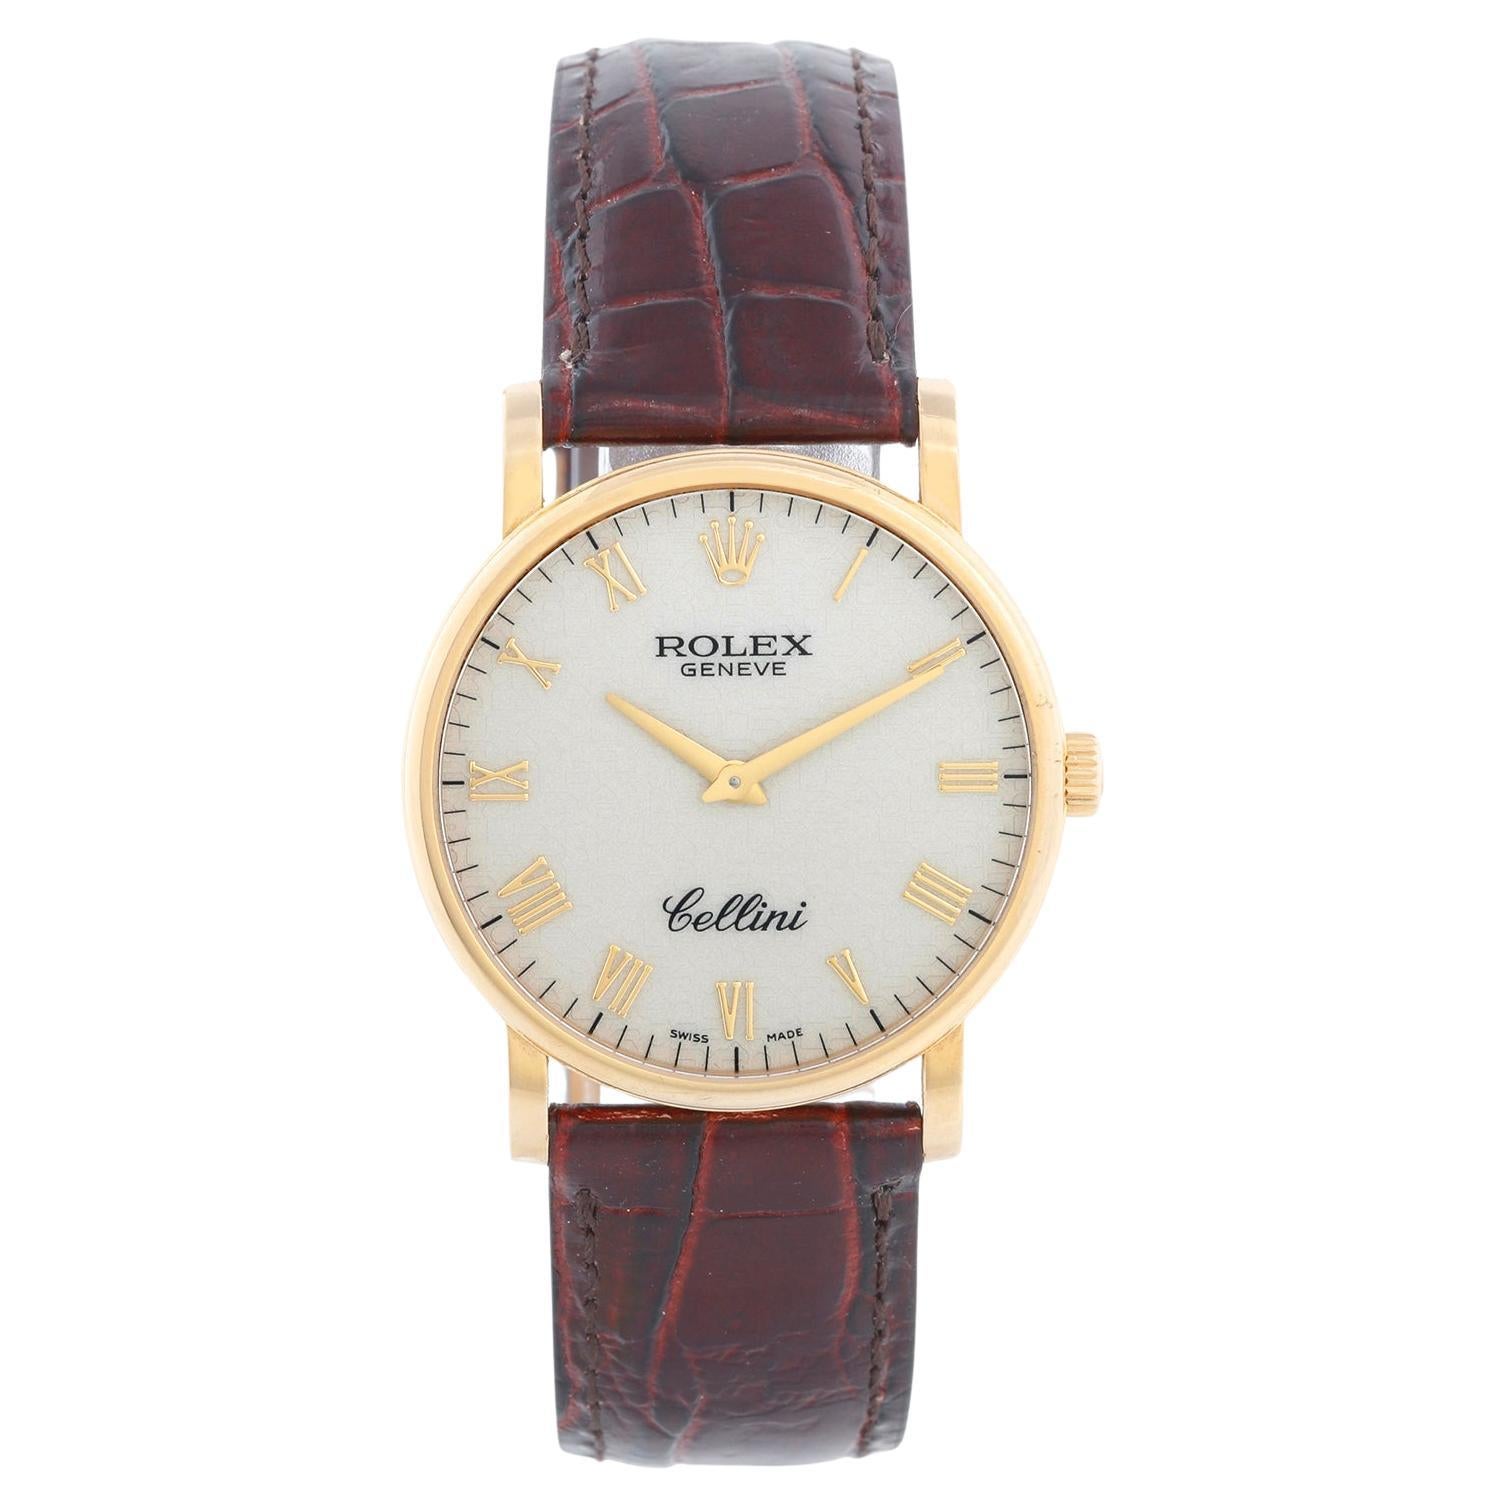 Rolex Cellini Classic 18k Yellow Gold Men's Watch 5115 For Sale